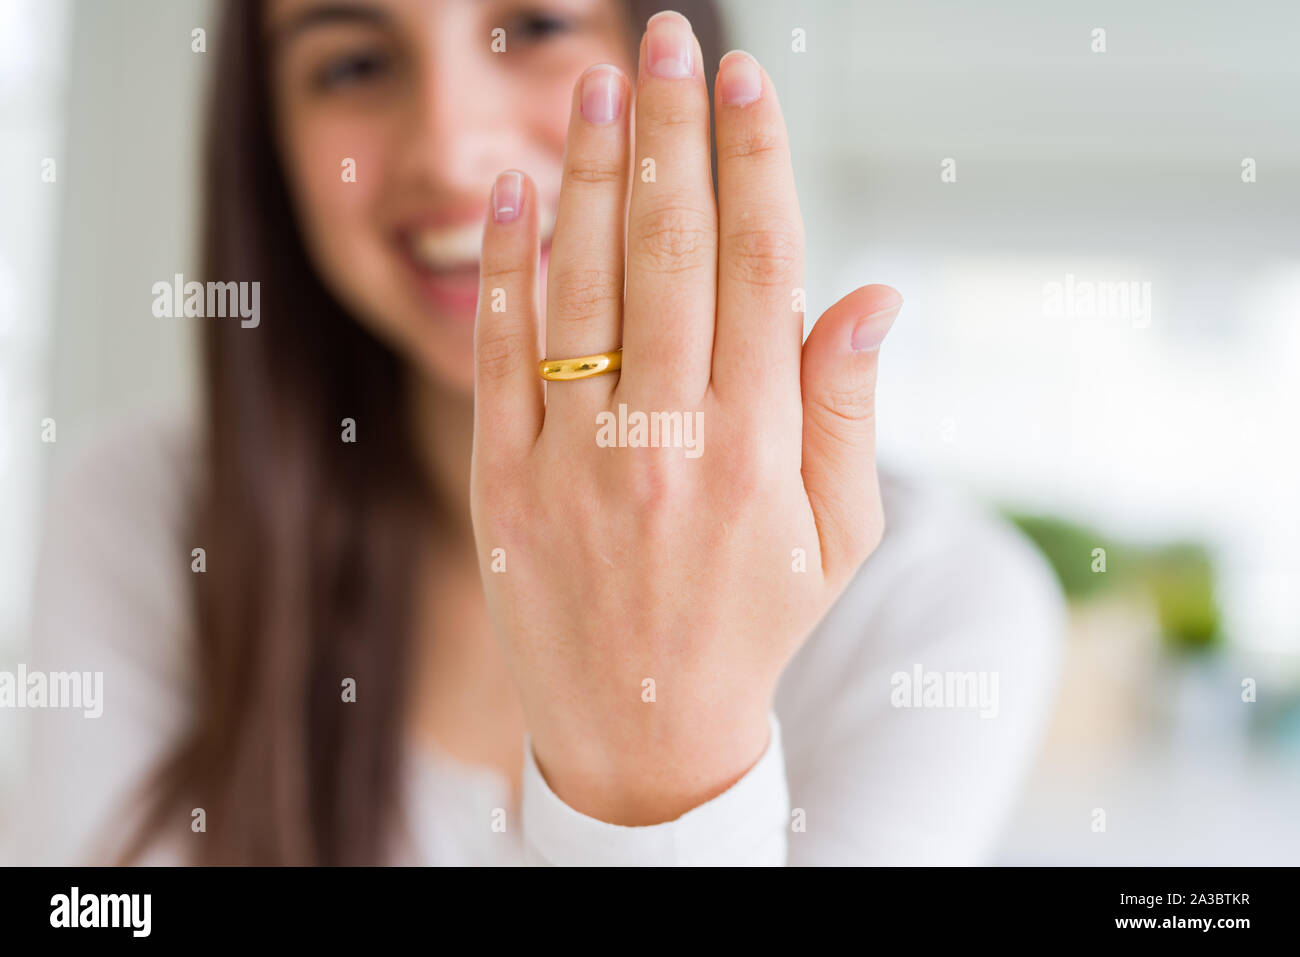 Woman hand touching her ring on finger Stock Photo by stockfilmstudio